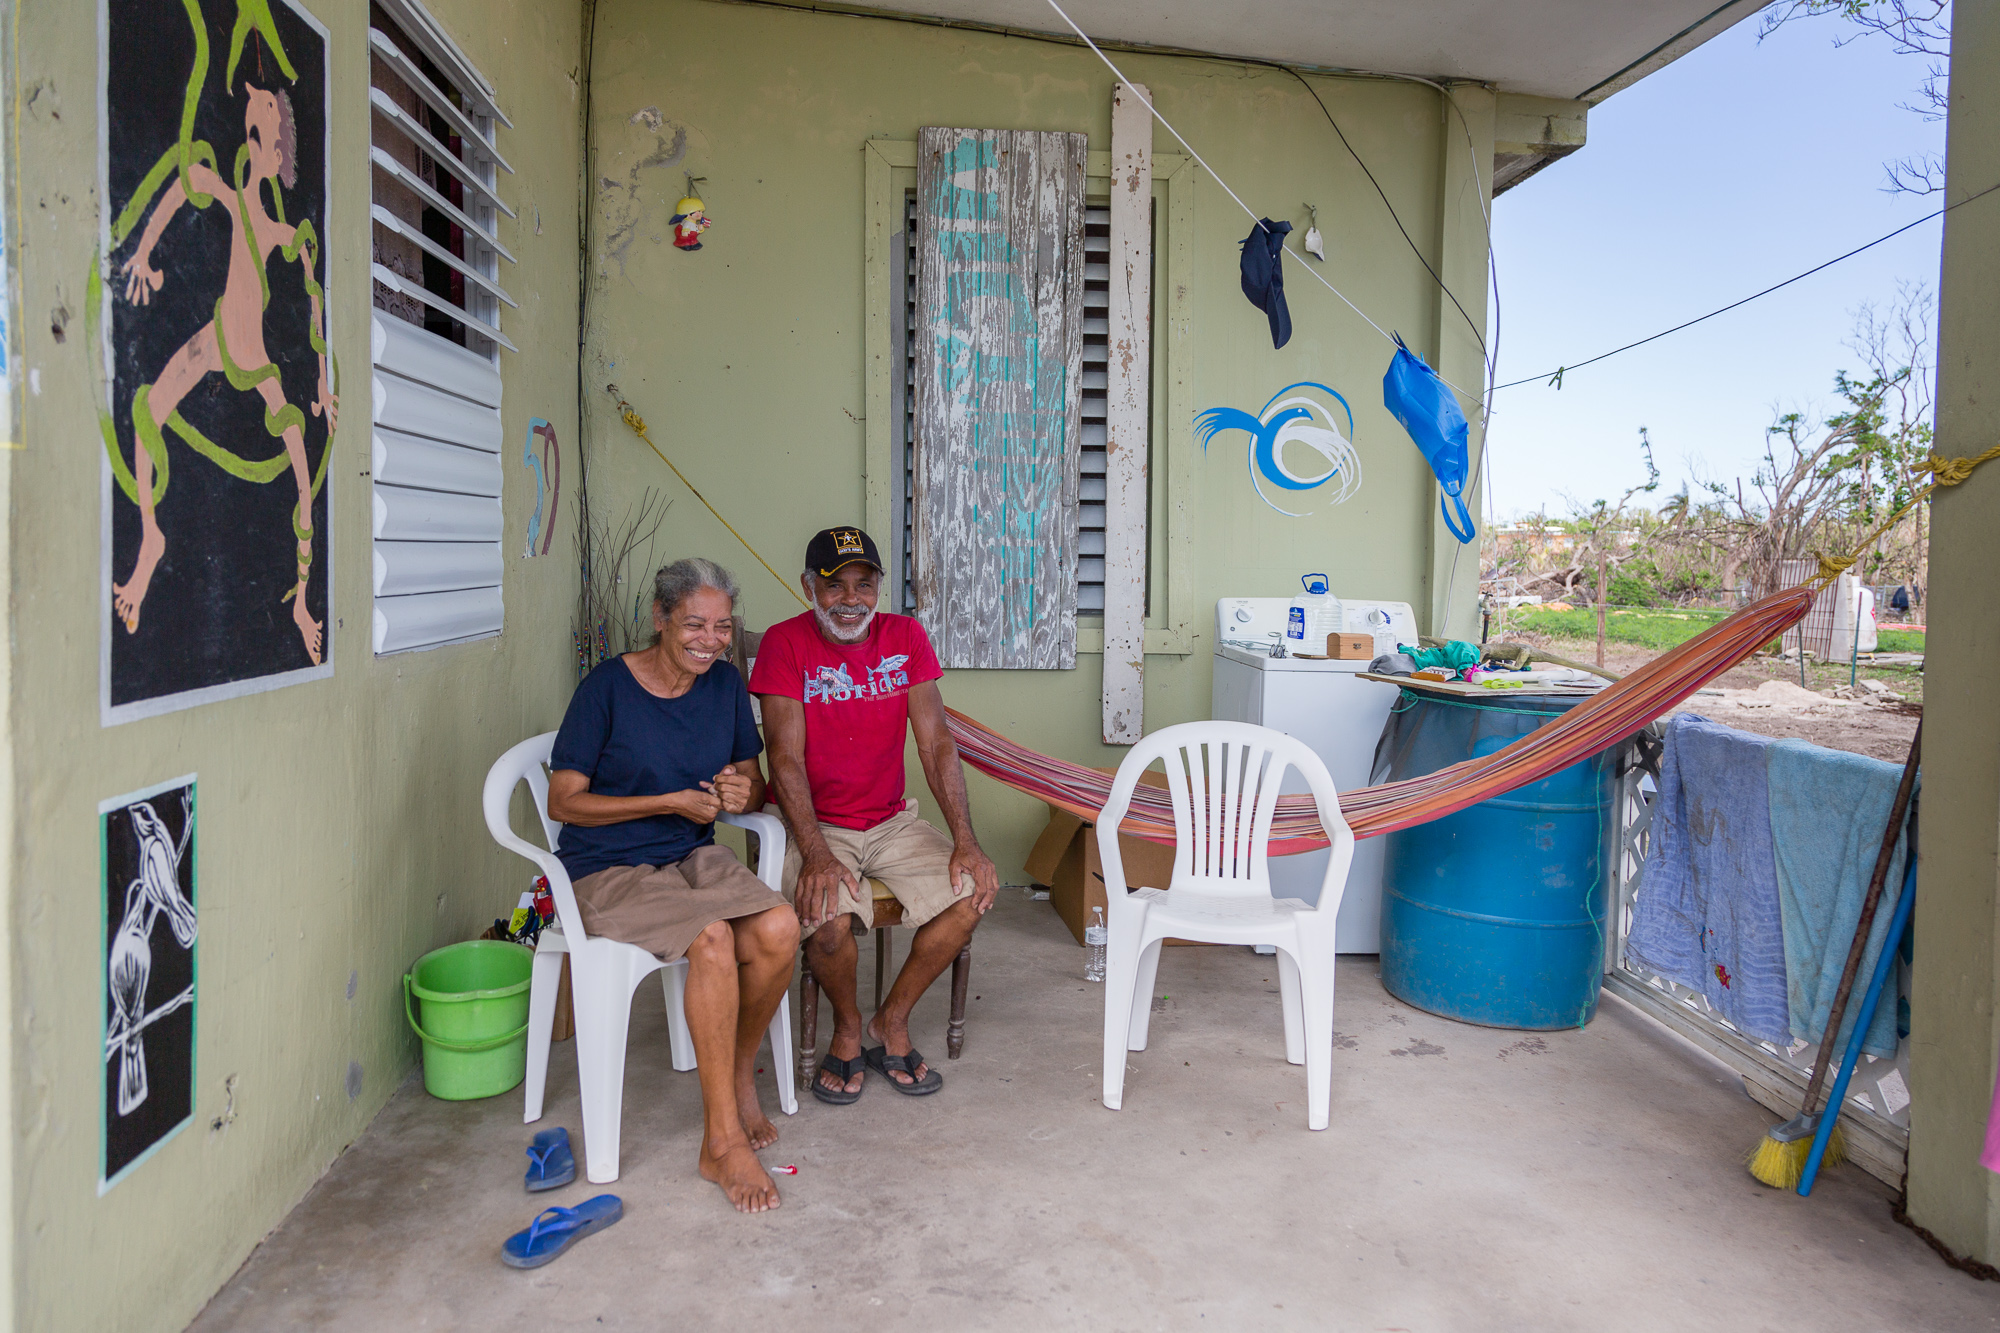 An artist and his wife rode out the storm at their waterfront home with the waves crashing at their door. Vieques, Puerto Rico.